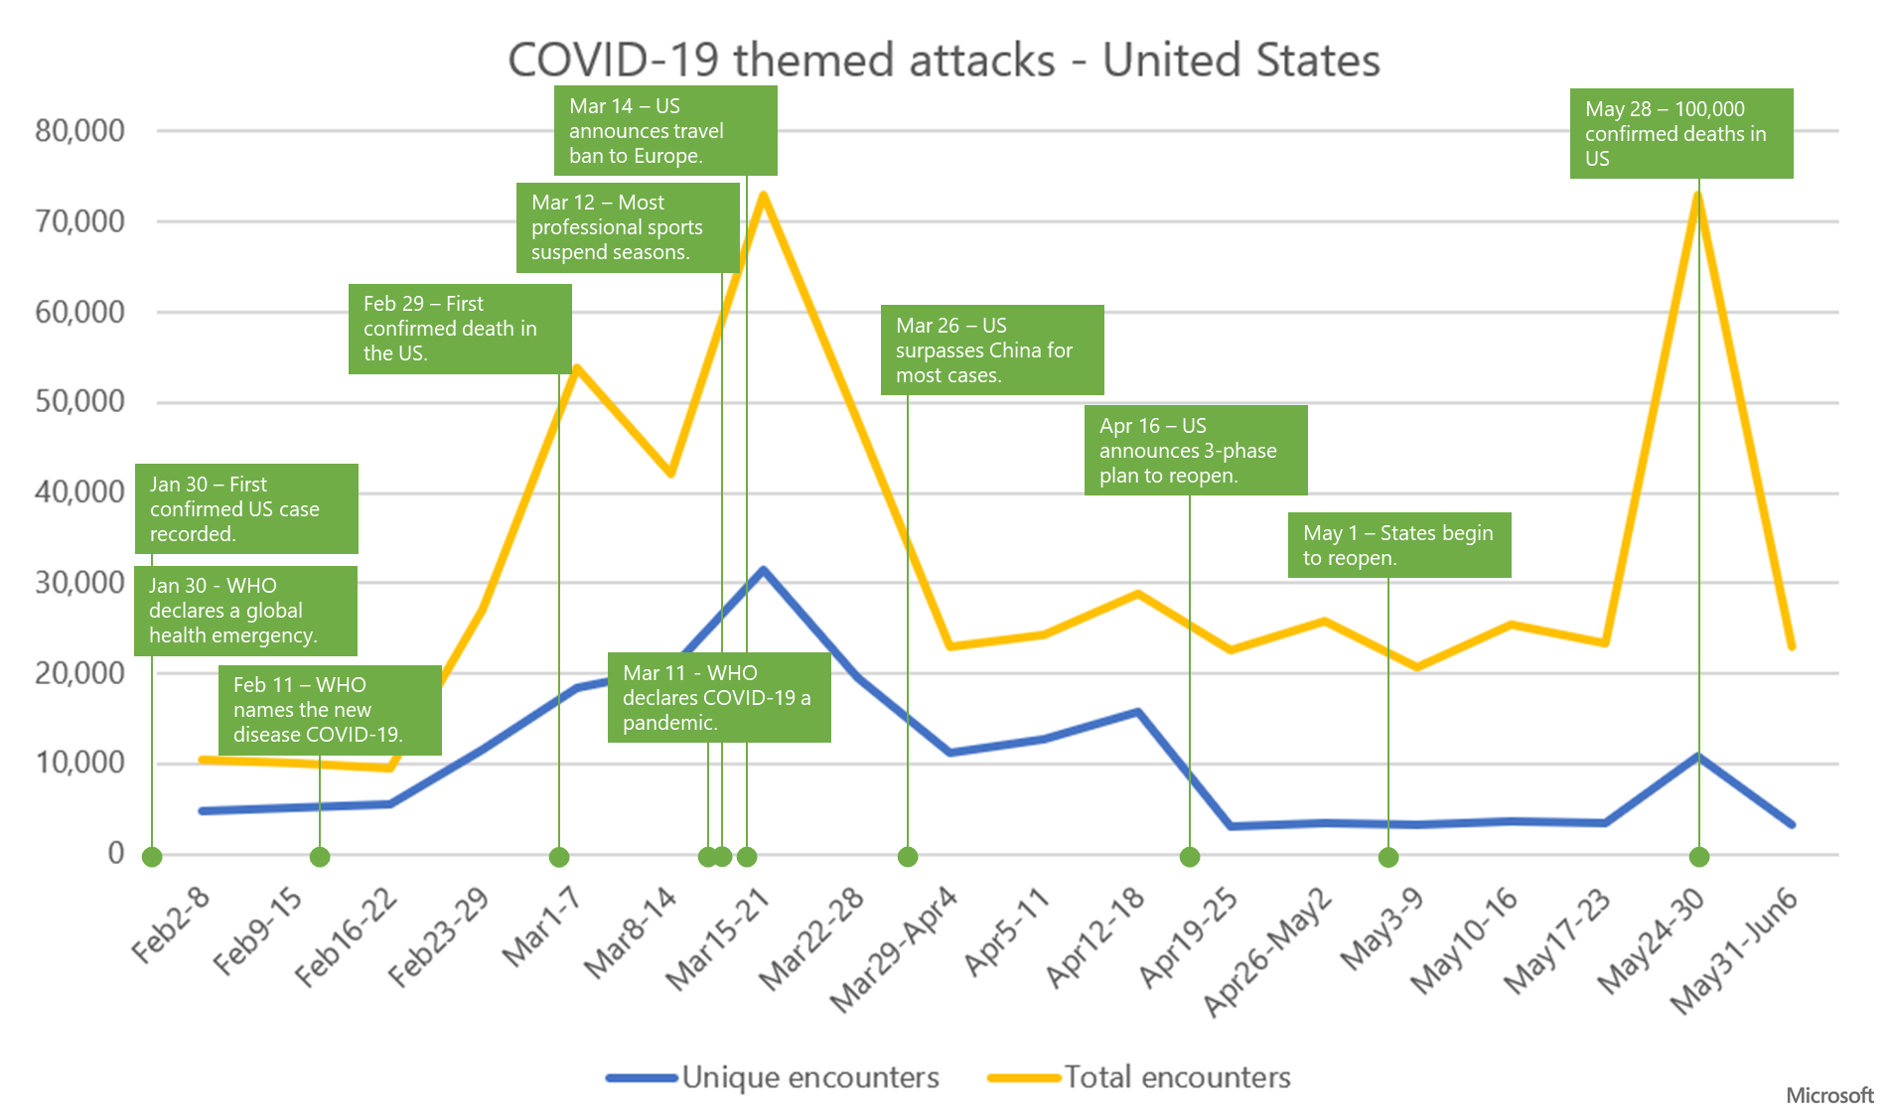 Graph showing trend of COVID-19 themed attacks and mapping key events during the outbreak in the United States